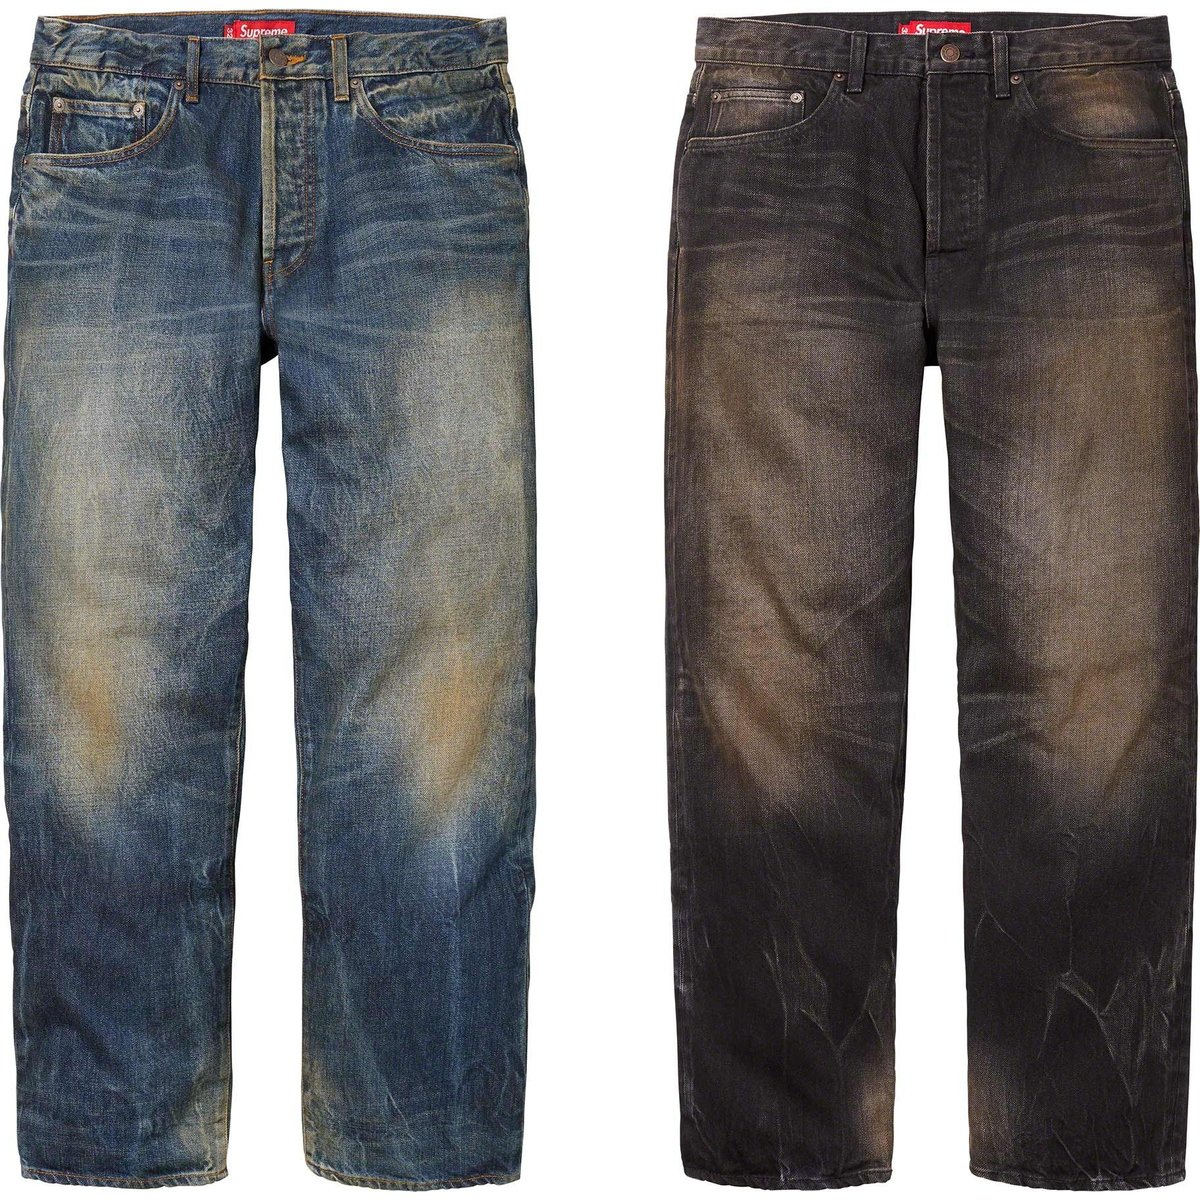 Supreme Distressed Loose Fit Selvedge Jean releasing on Week 11 for fall winter 2023